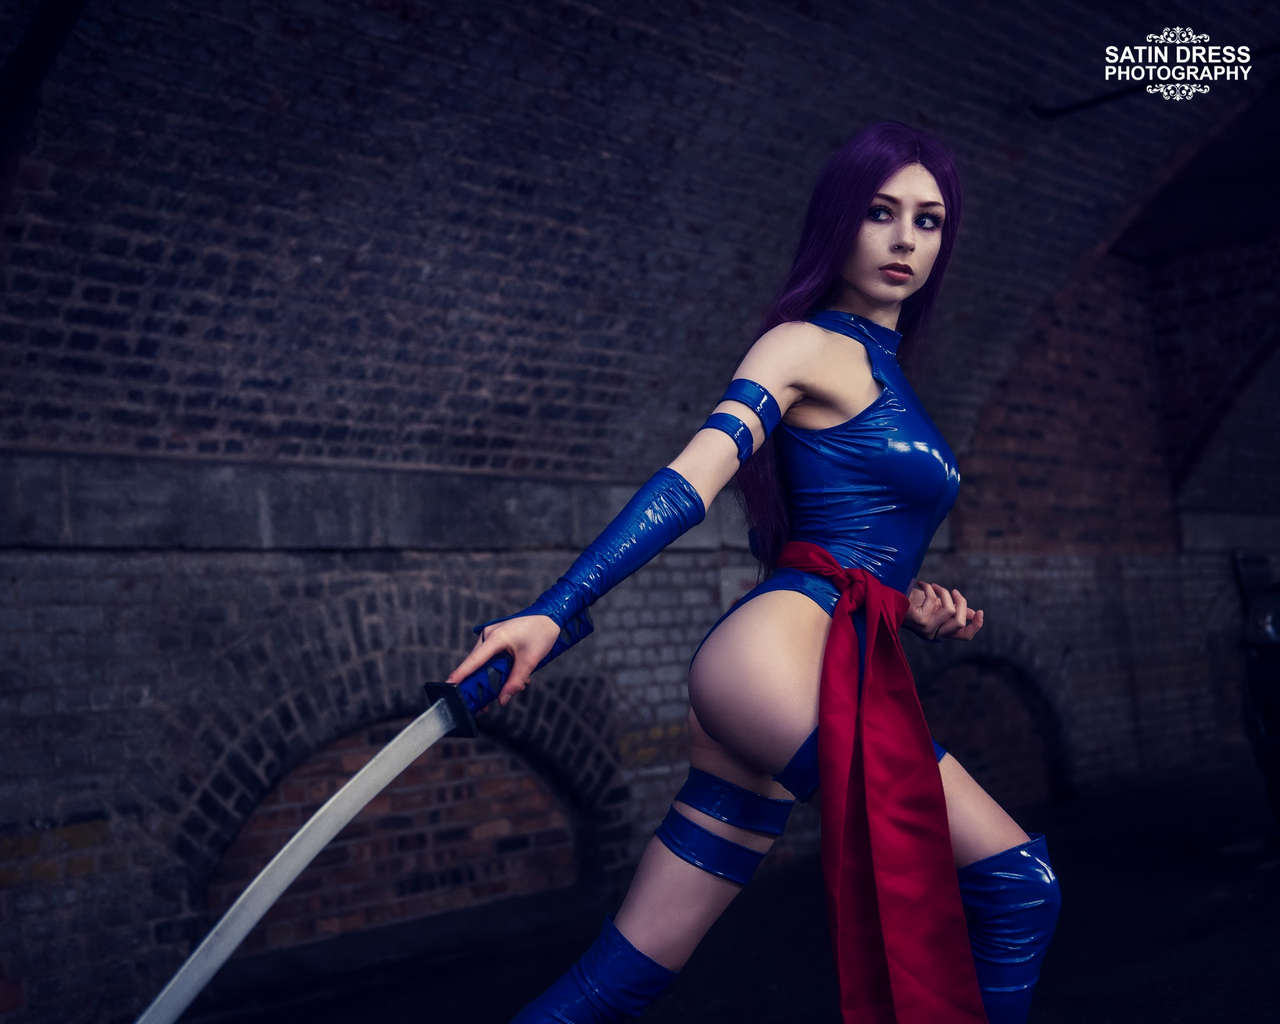 Anaelic Cosplay As Psylocke From Xem Photo By Satin Dres